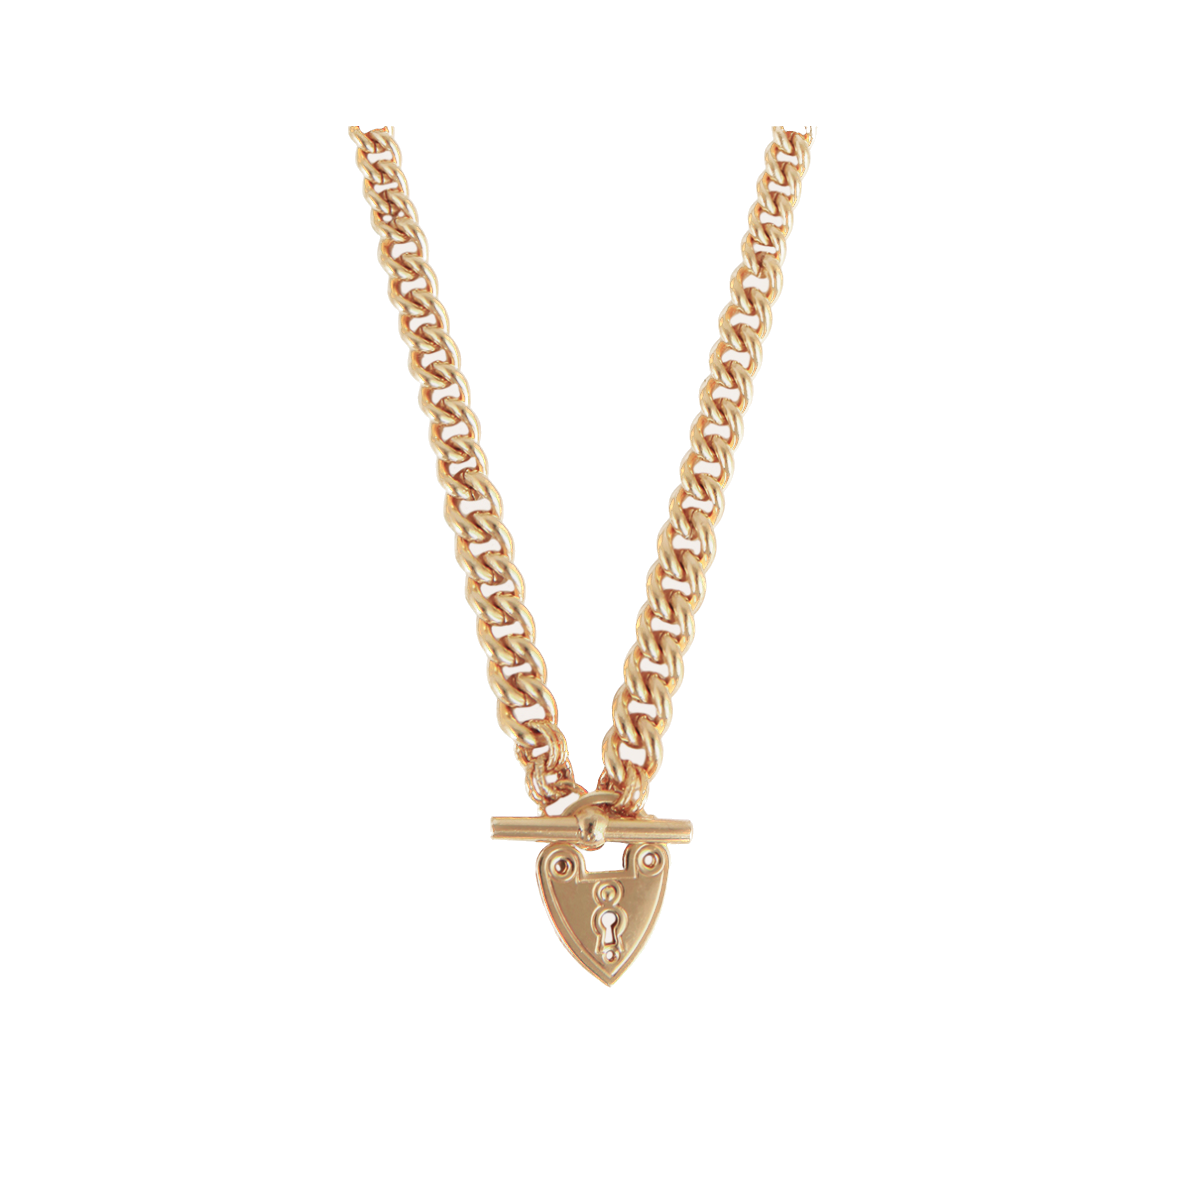 gas-necklaces-yellow-gold-locked-gold-necklace-42292812251387